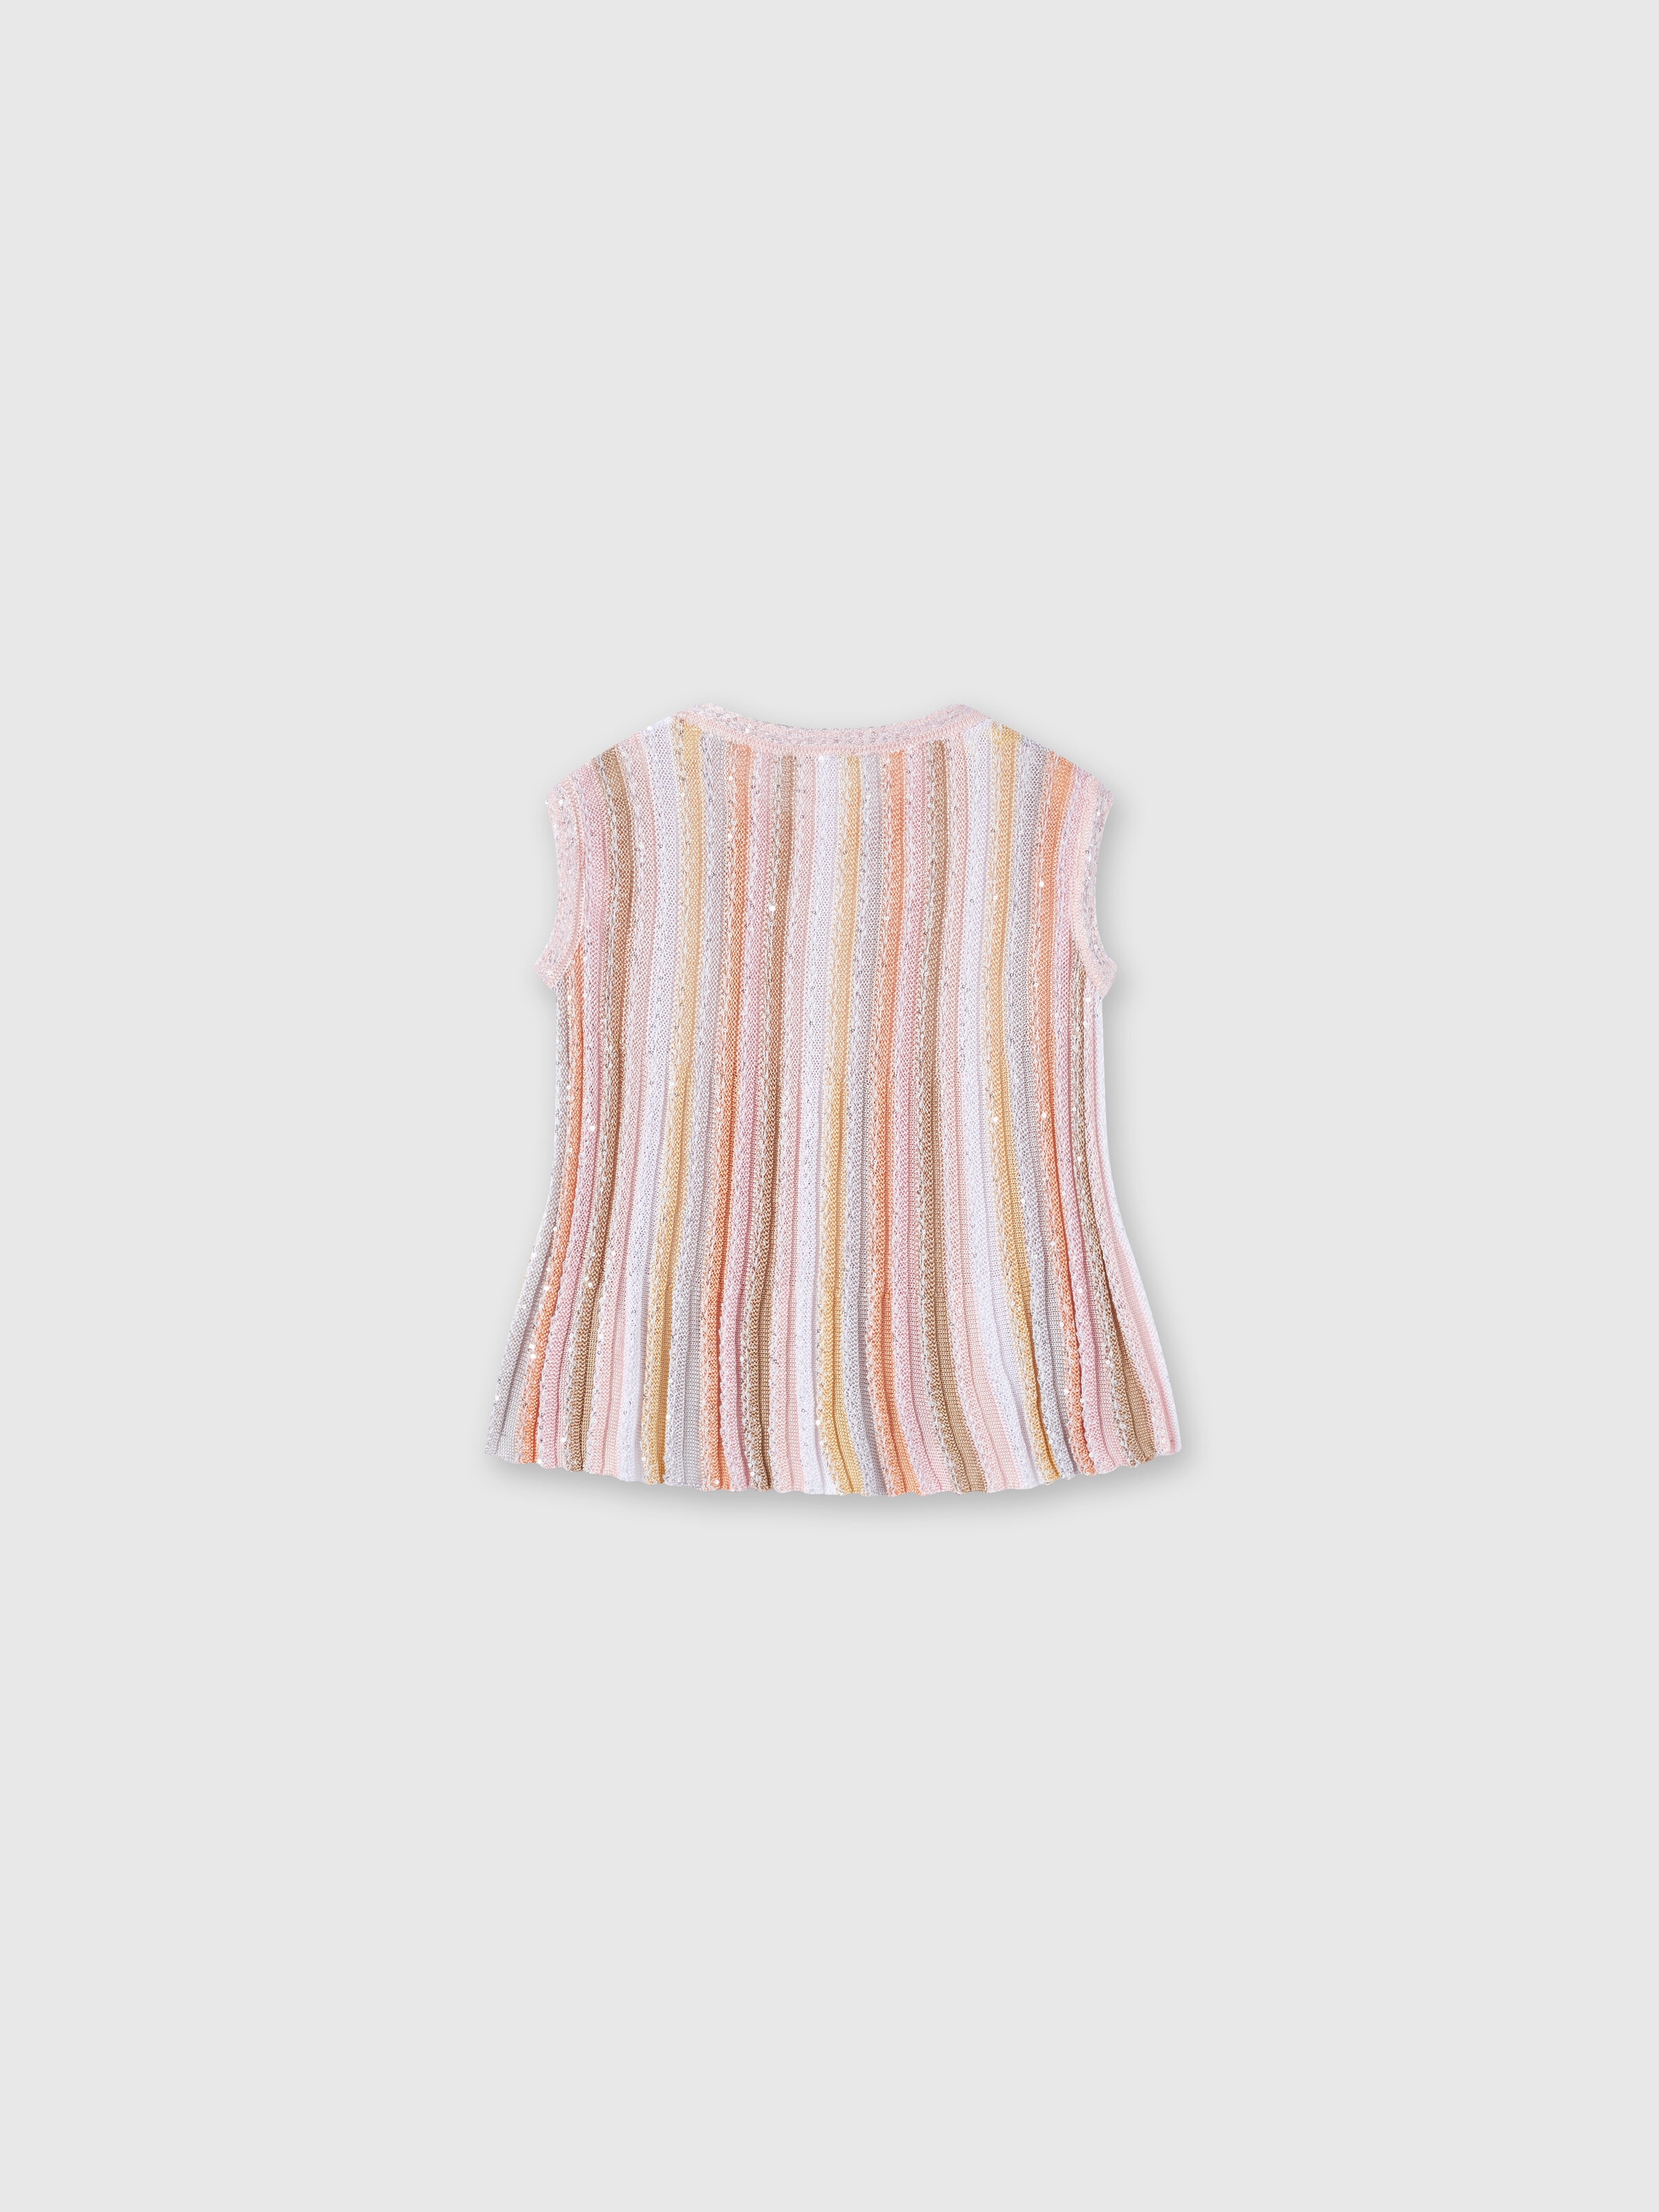 Sleeveless top in pleated viscose knit with sequins, Multicoloured  - 1